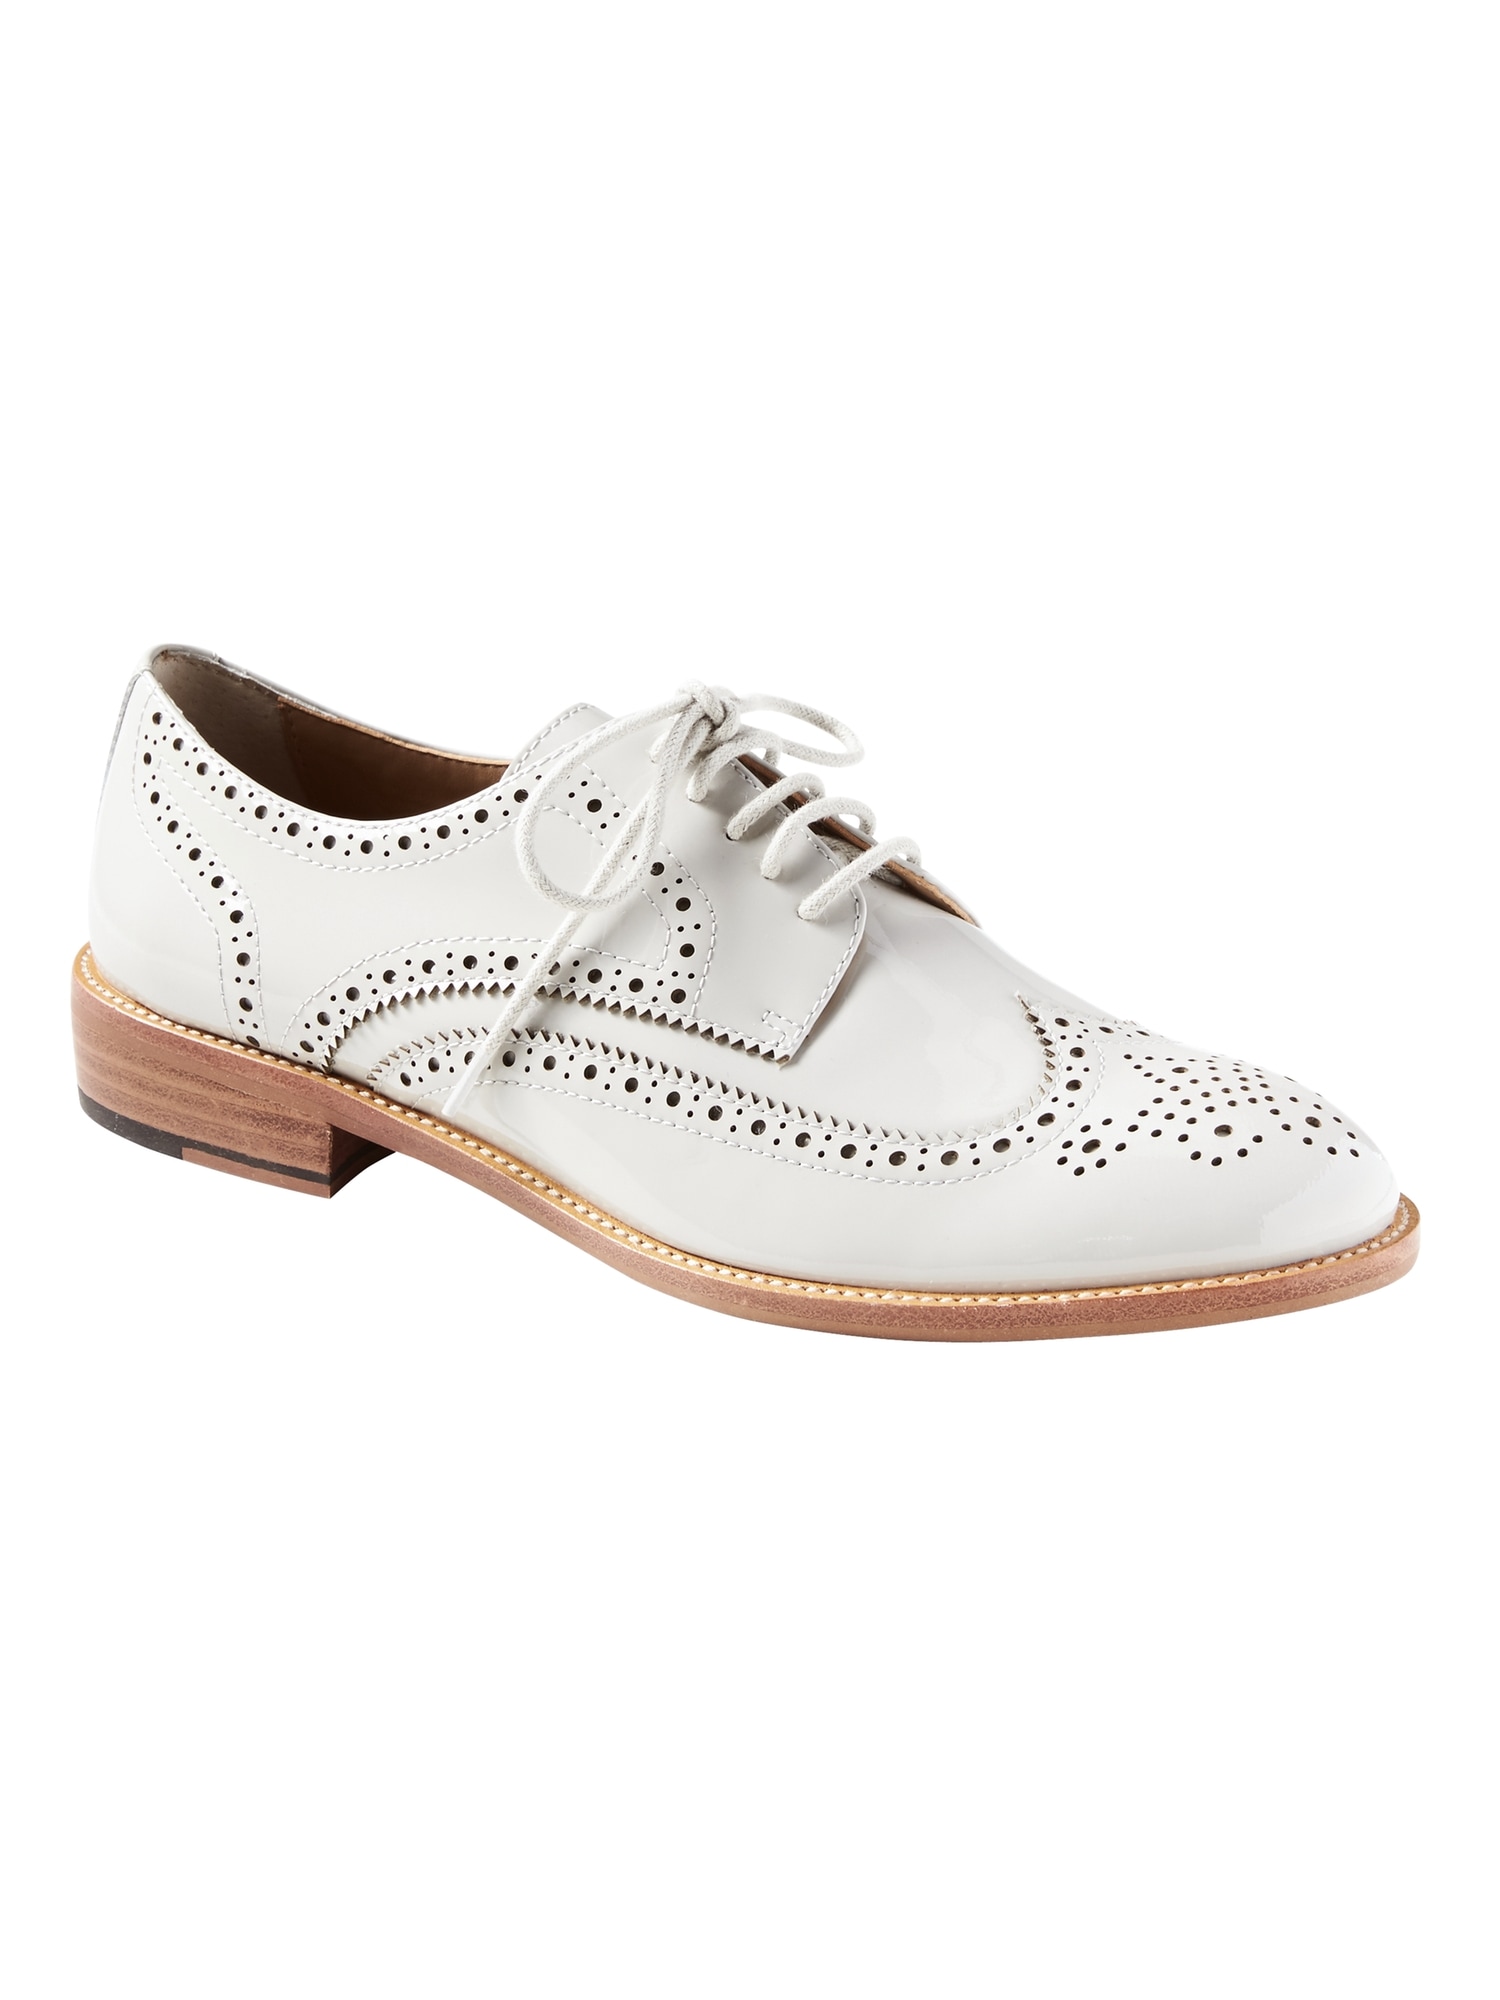 Leather Brogue Oxford